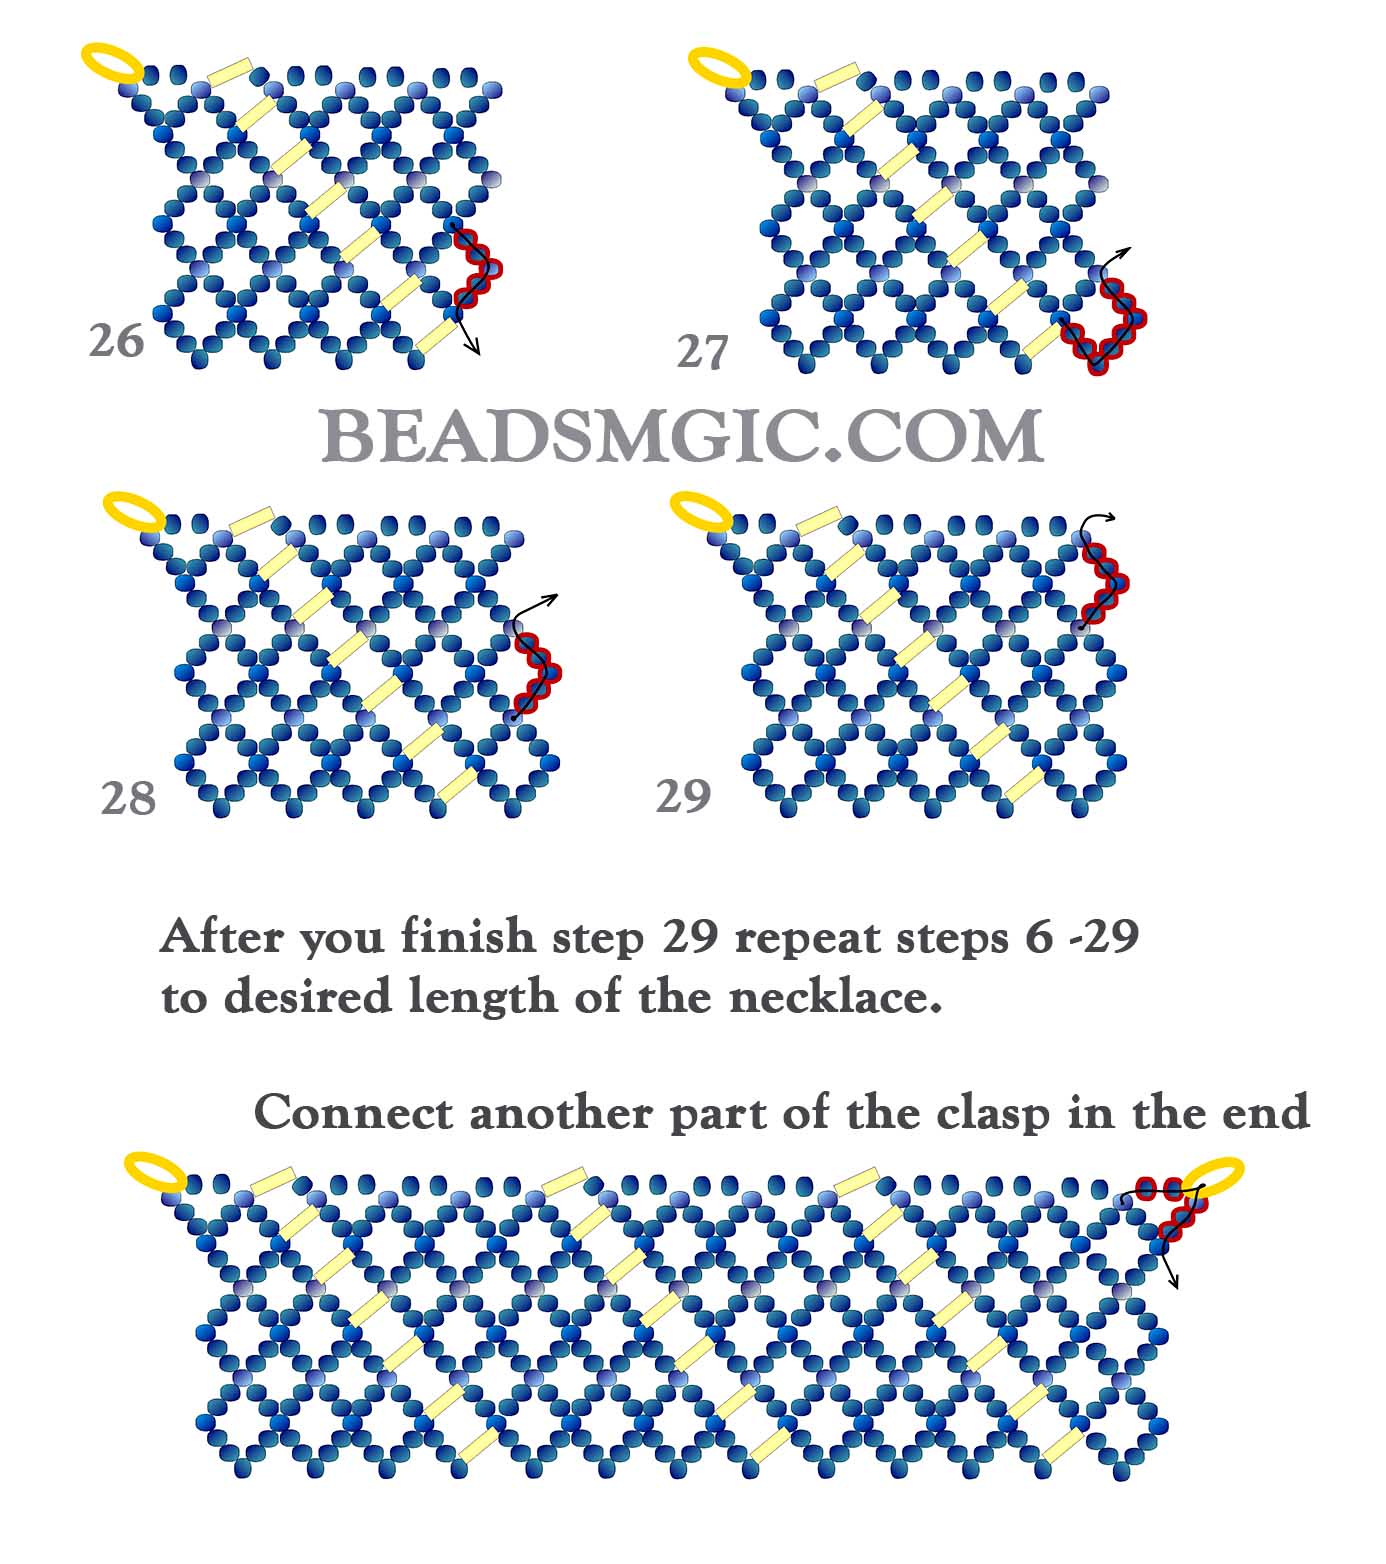 Free pattern, beaded necklace, bead patterns, seed beads necklace, seed beads, bugle beads, basic netting stitch, free step-by-step beading instruction, beading instructions 